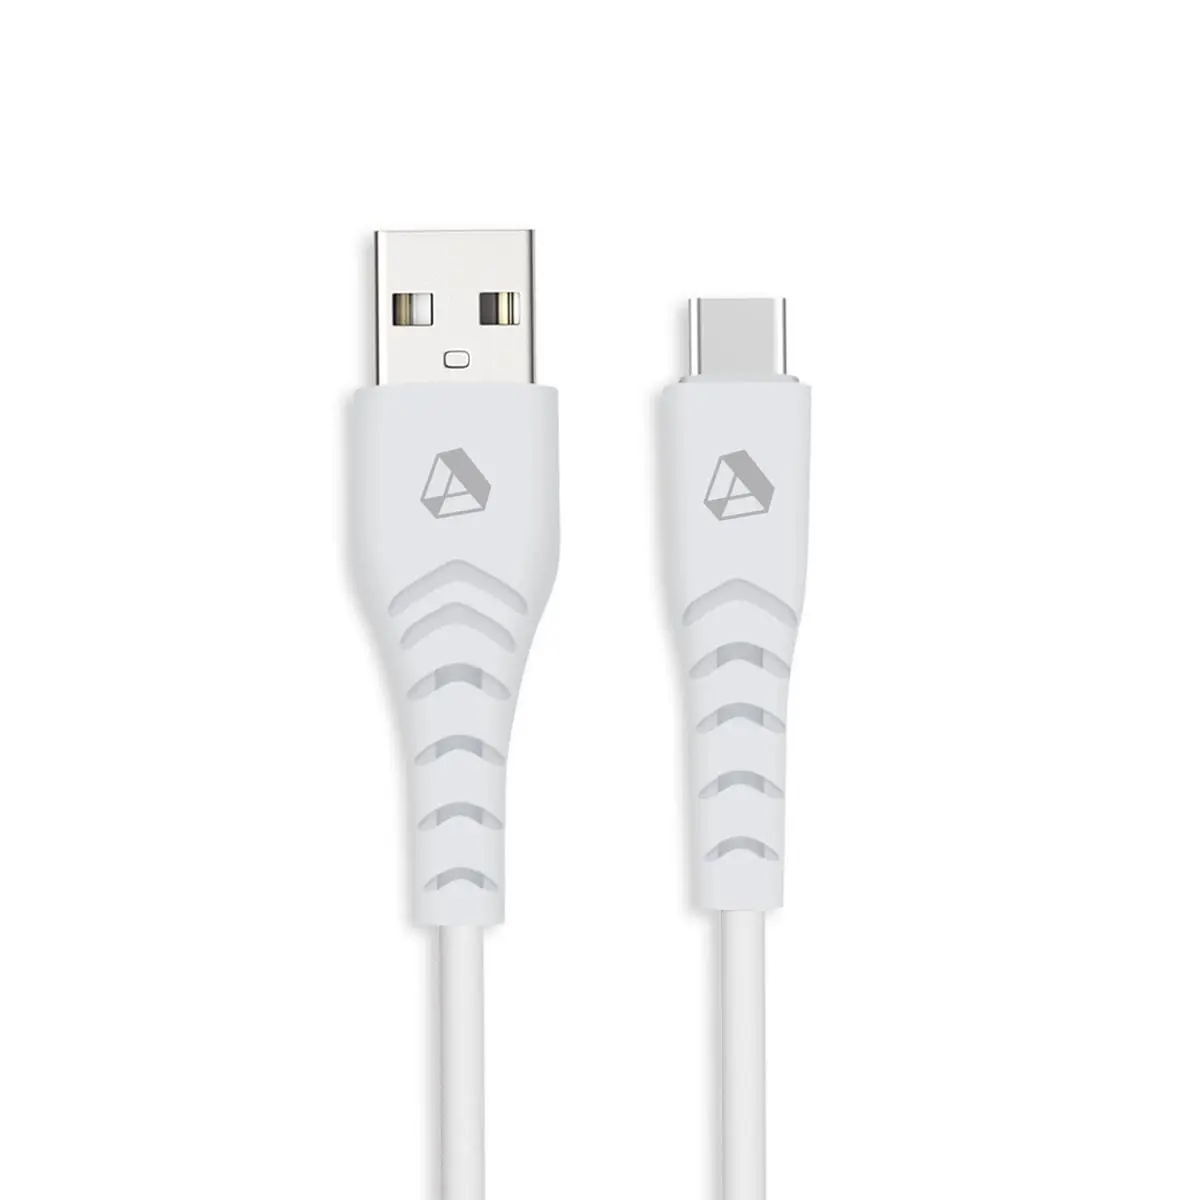 Why Adreama's Eco-friendly USB-A to USB-C Cable is the Perfect Choice for Sustainable Charging